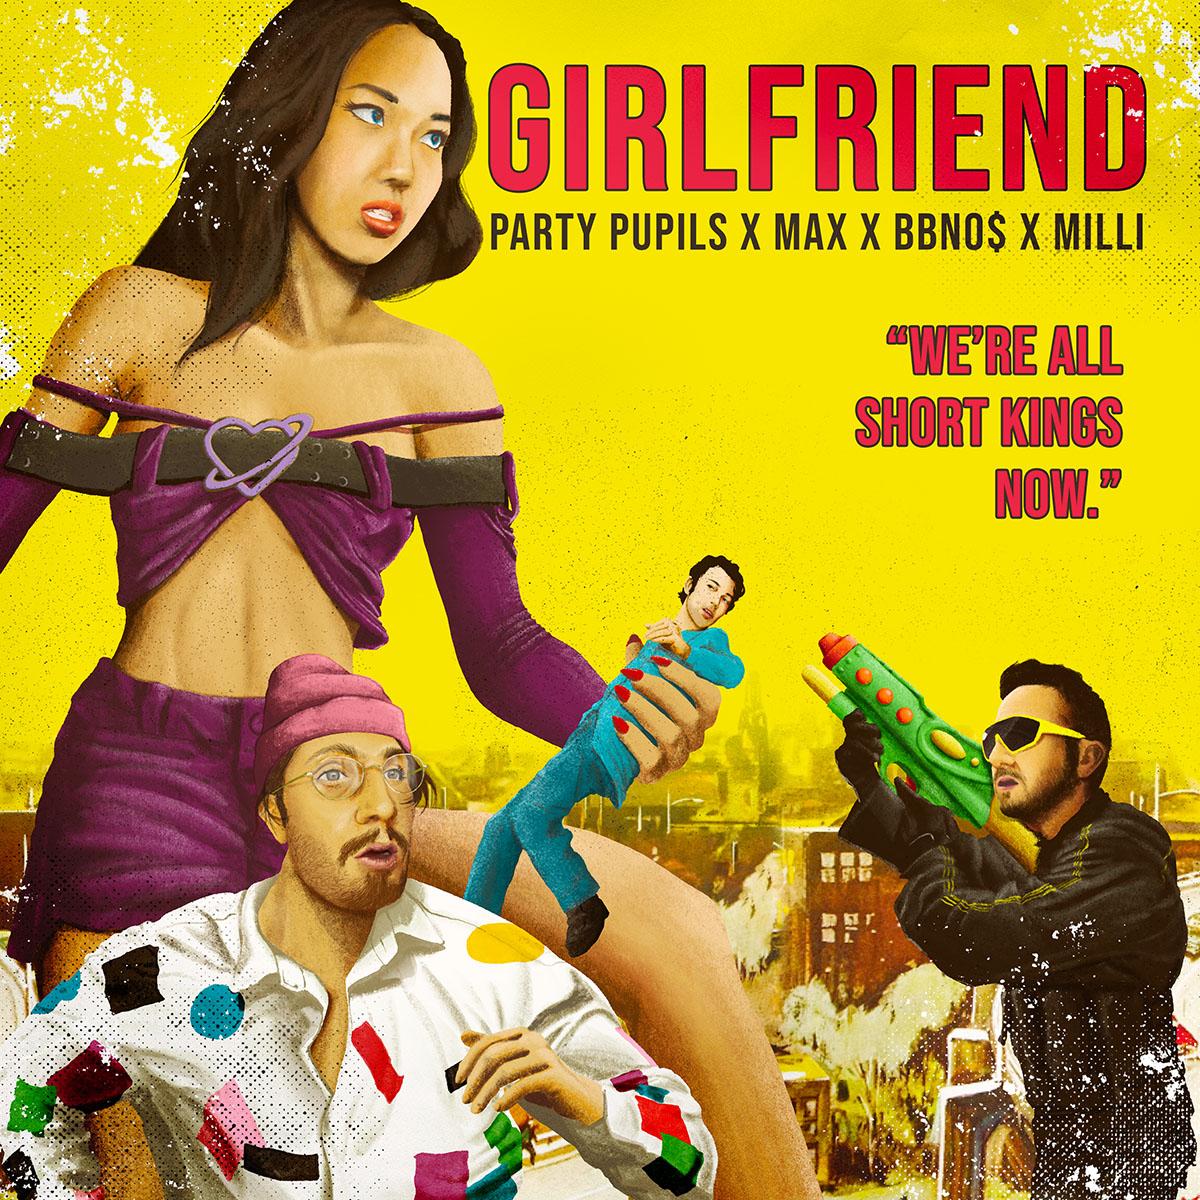 Interview-MILLI-and-bbno$-In-New-Song-Girlfriend-SPACEBAR-Photo_SQ01.jpg